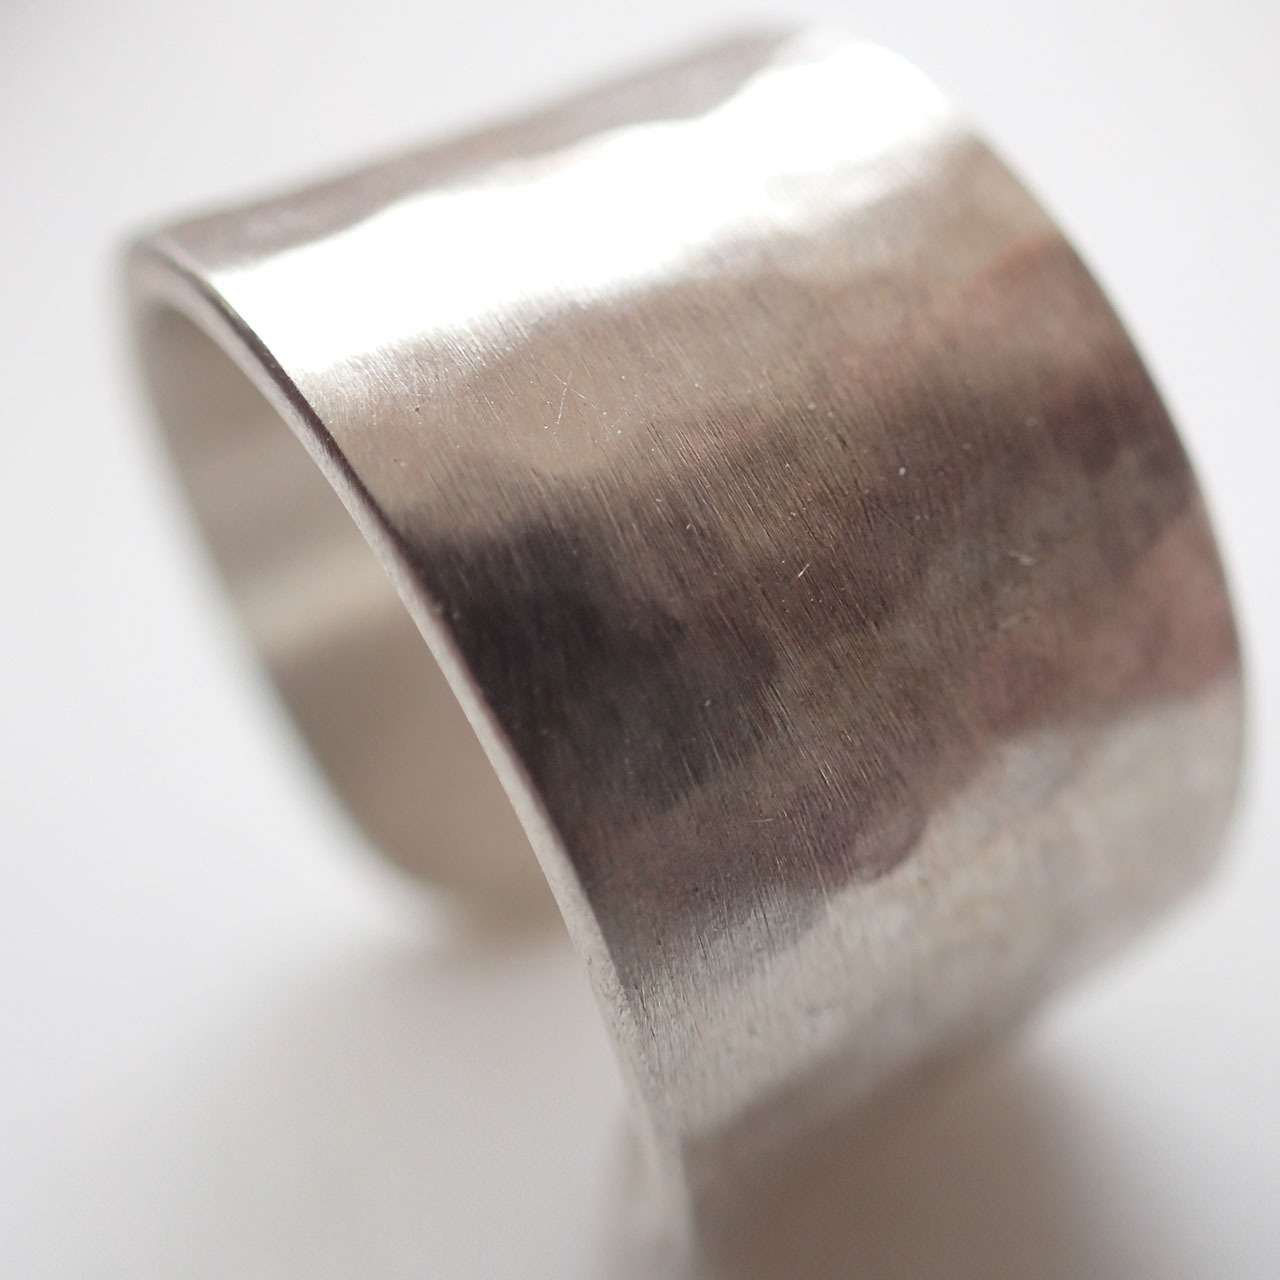 Hammered Flat Open Ring(13mm)　